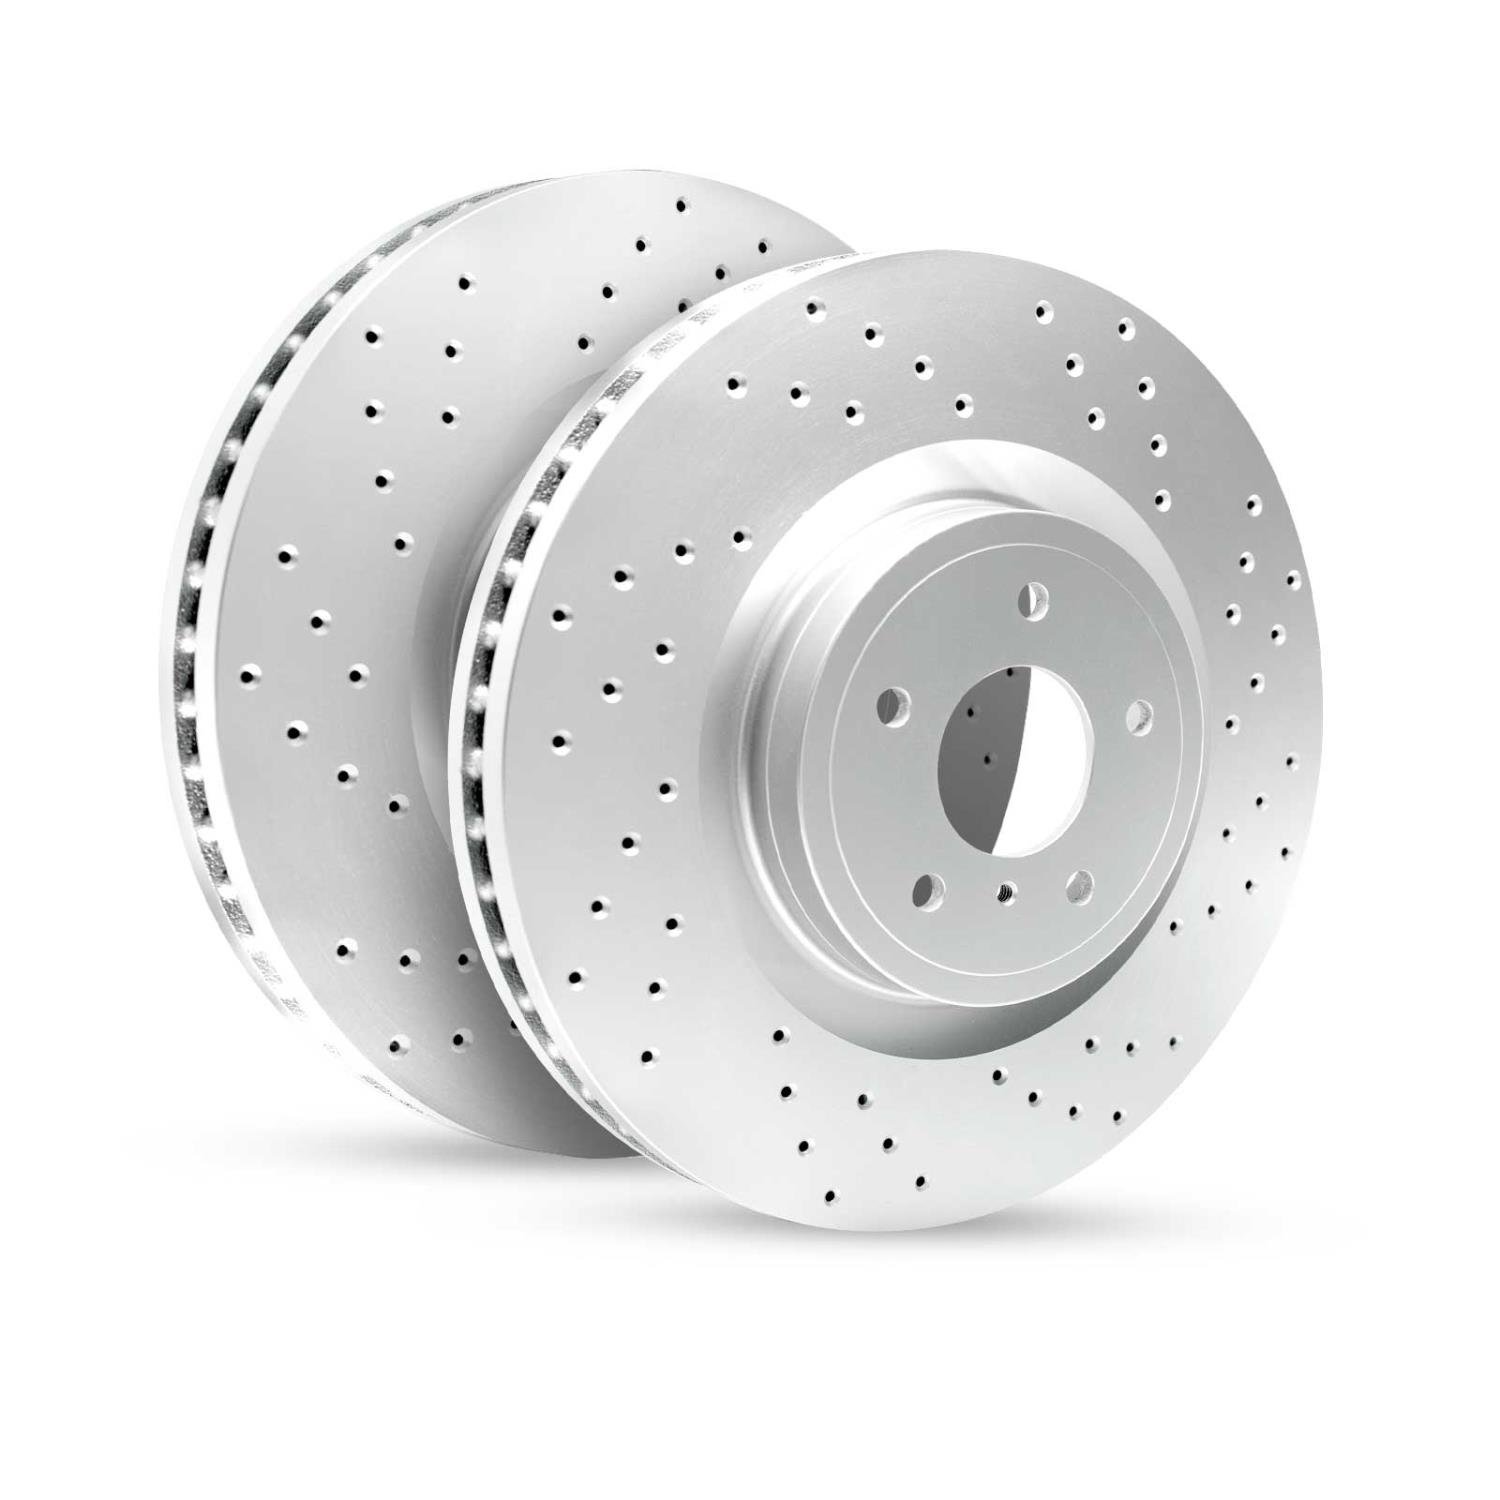 GEO-Carbon Drilled & Slotted Brake Rotor Set, Fits Select Ford/Lincoln/Mercury/Mazda, Position: Rear